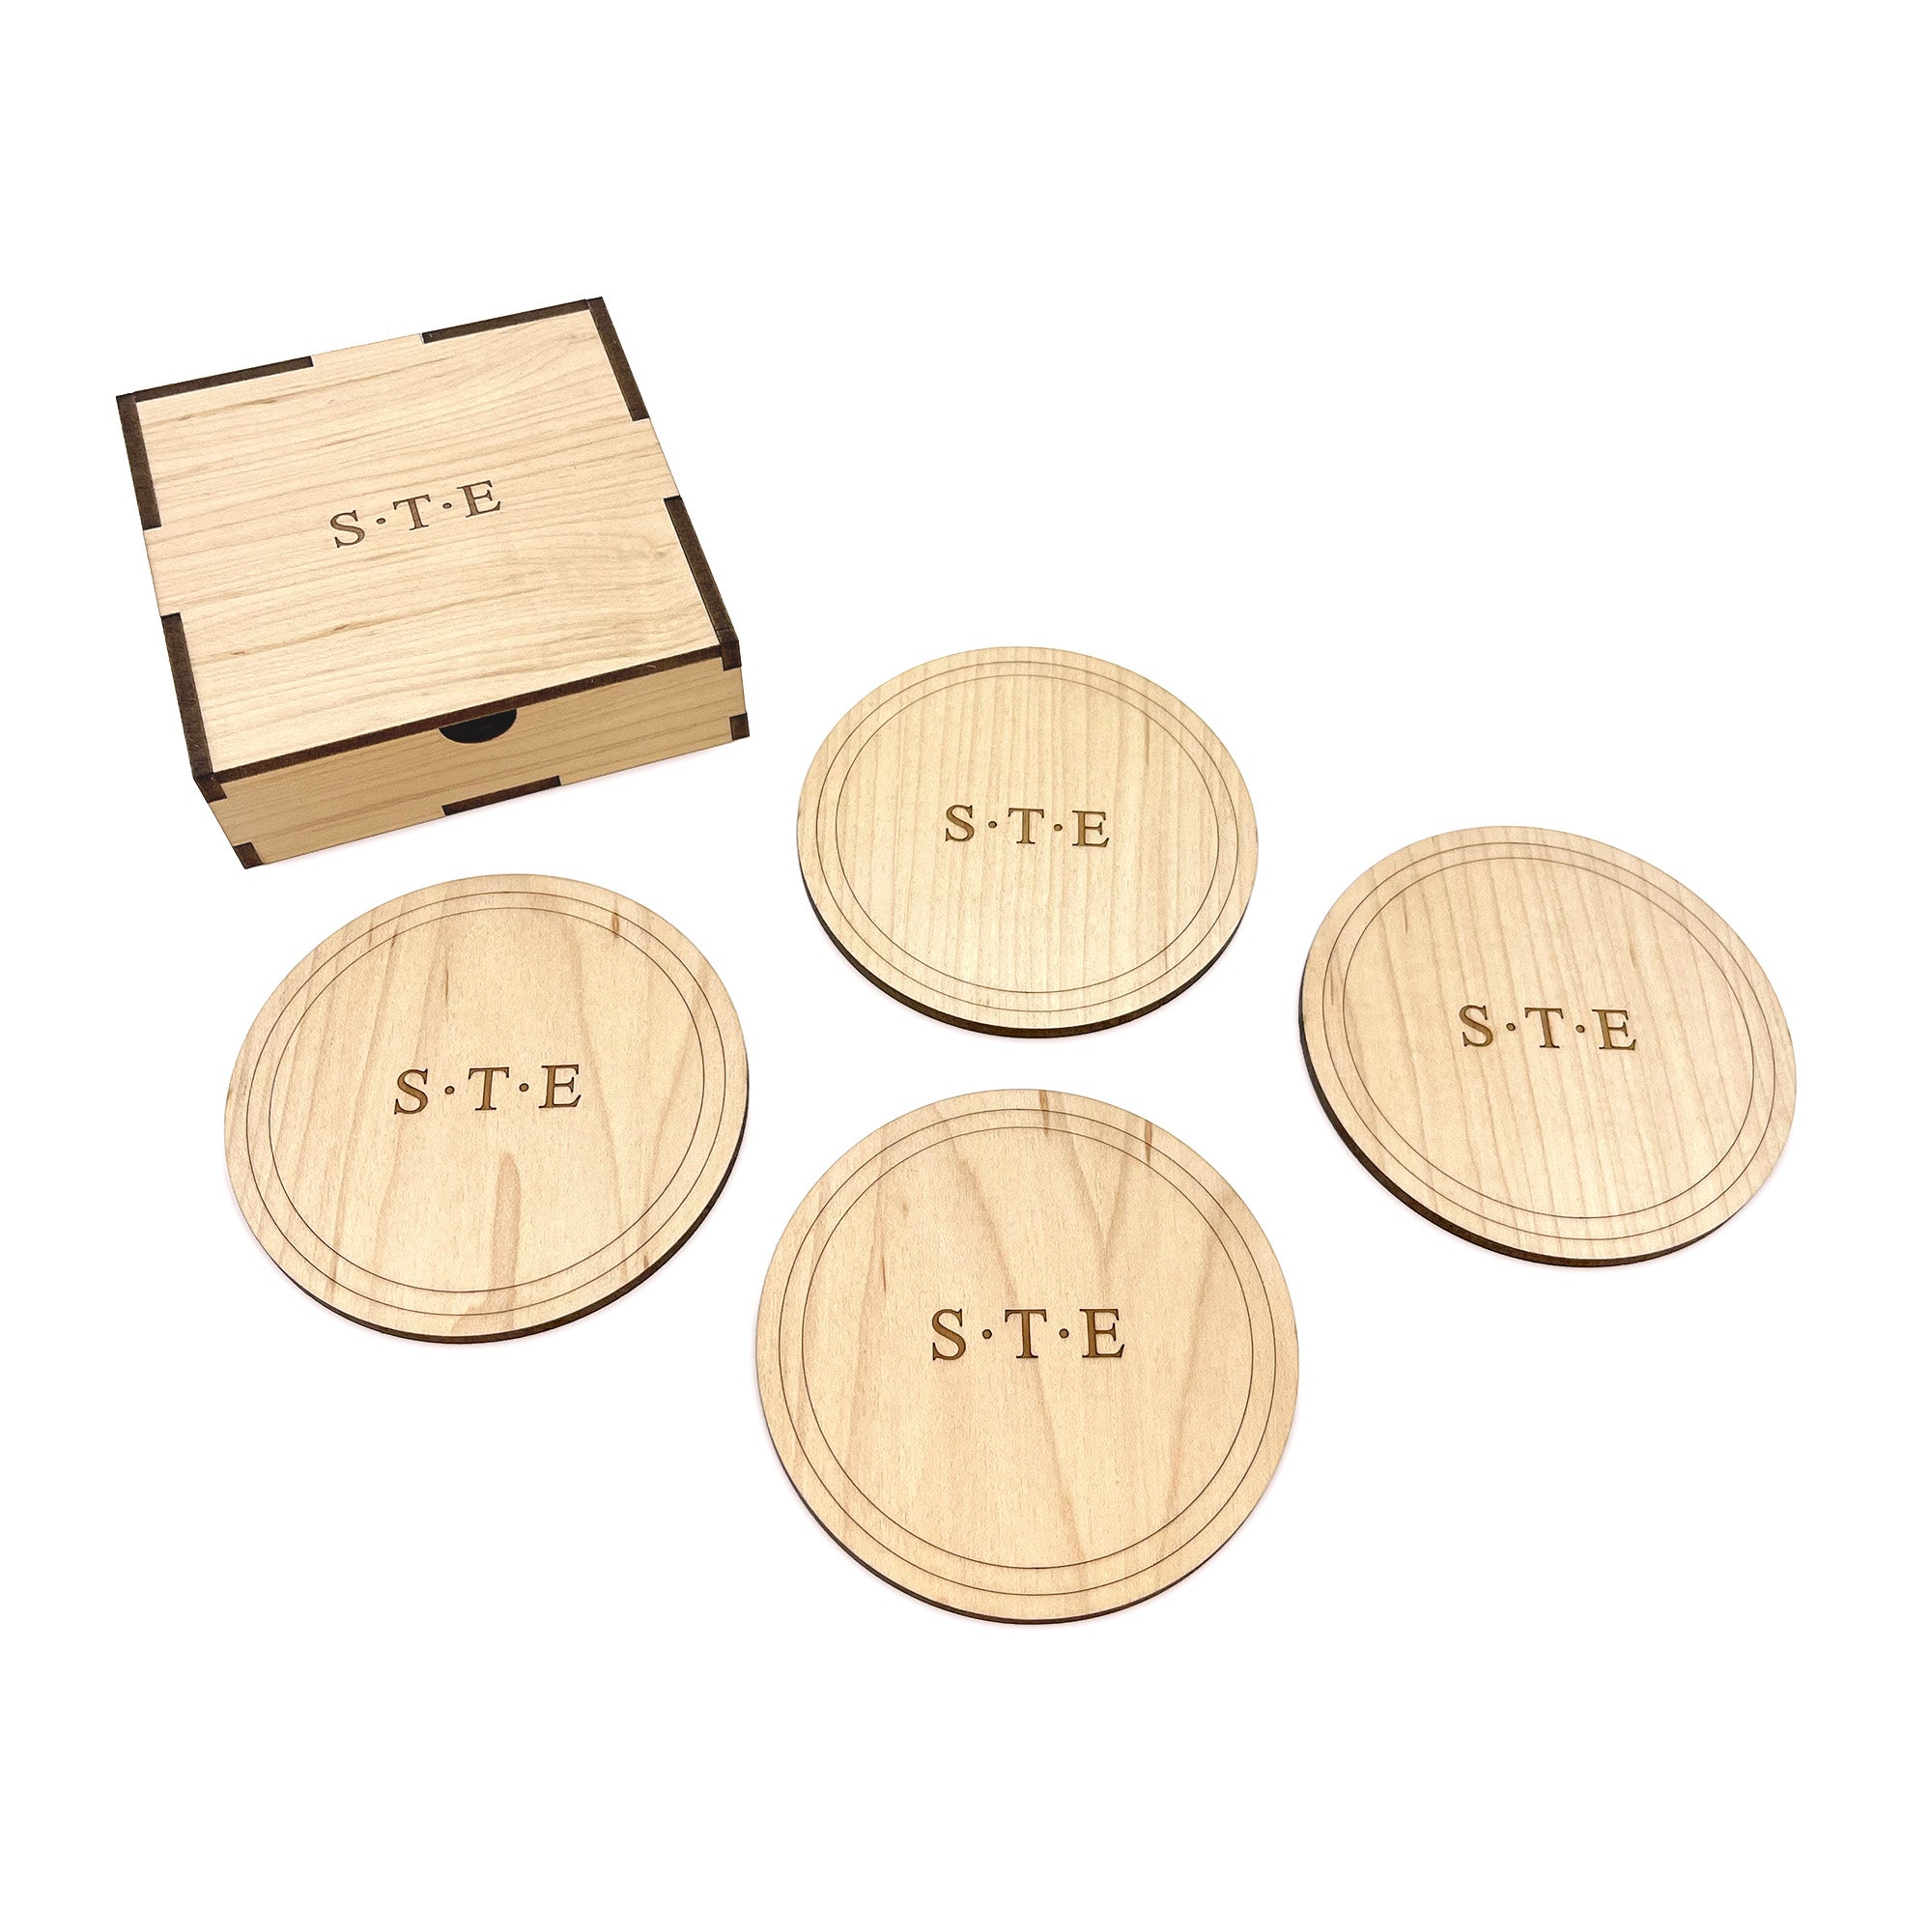 Wood Drink Round Coasters Set of 6 Laser Cut Coasters with Stand